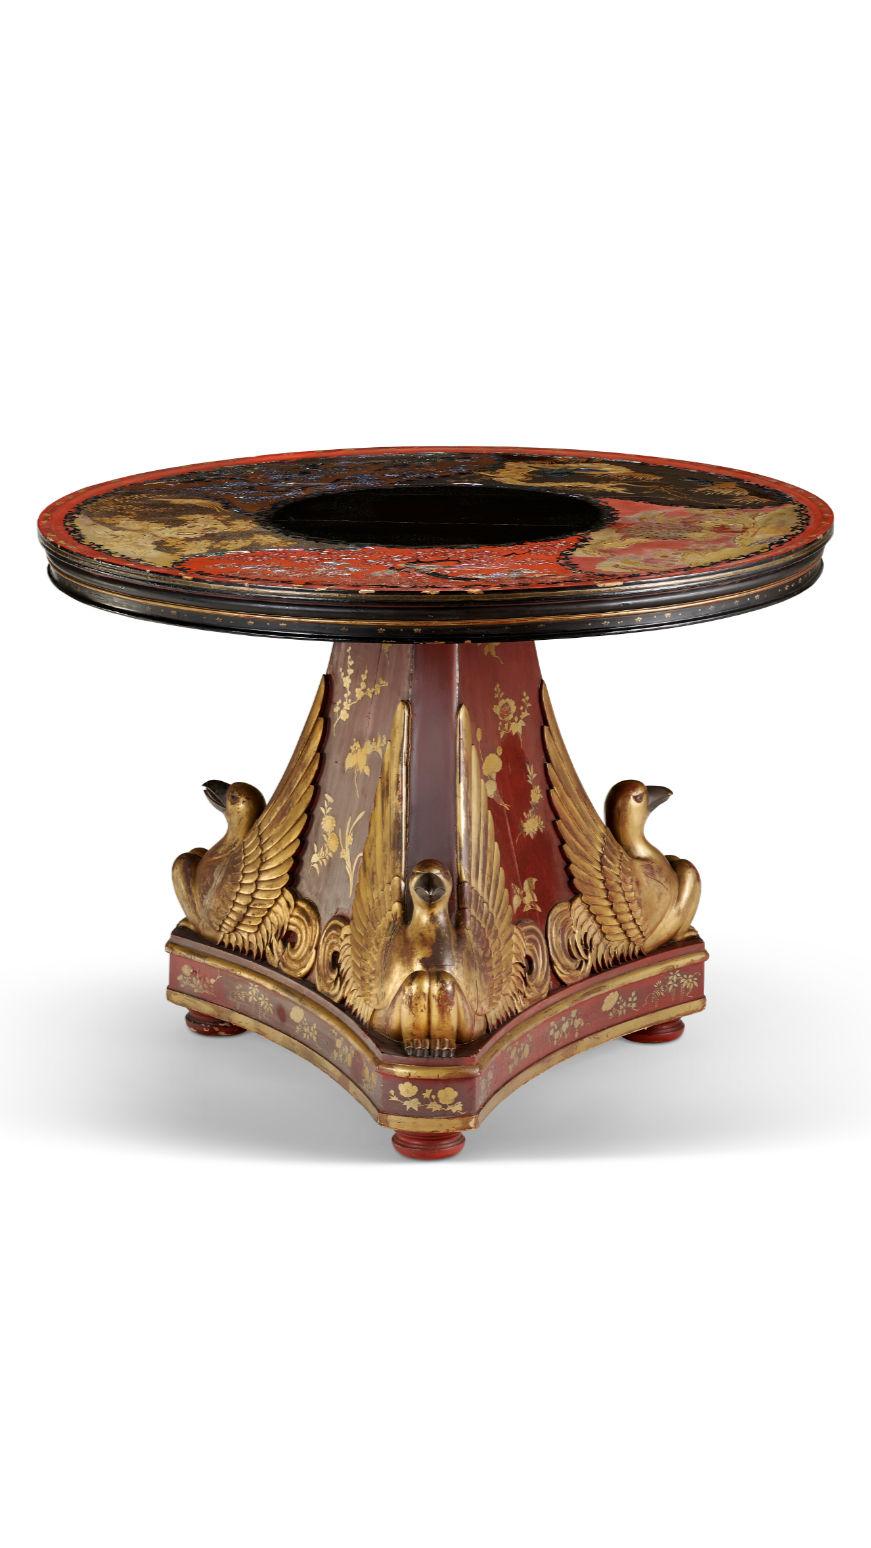 Meiji Japanese Export Red Lacquer Center Table with European Pedestal